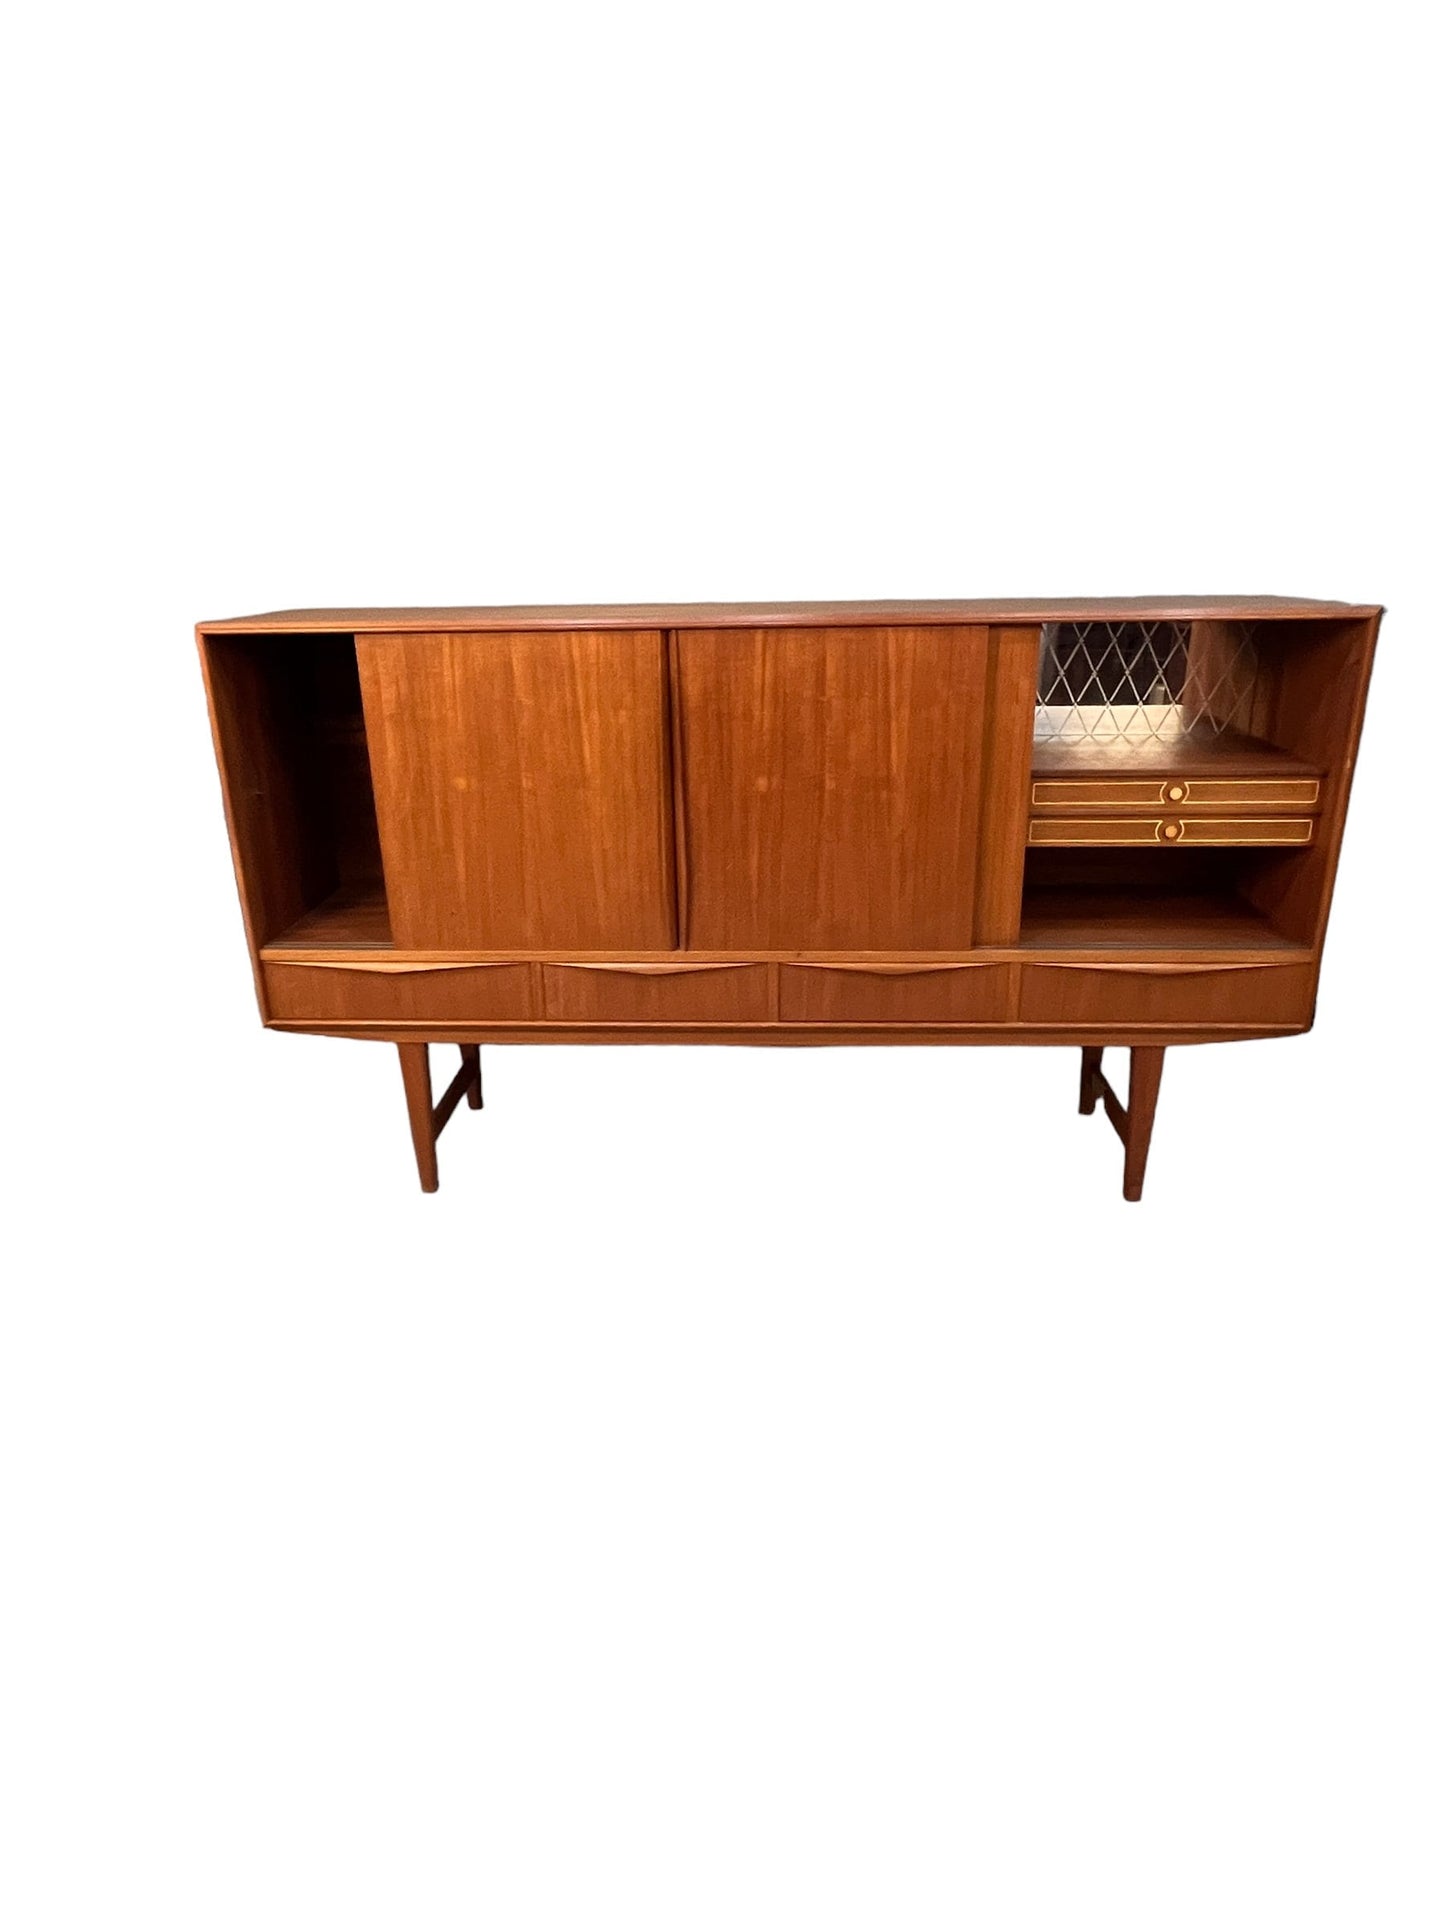 Mid Century teak high sideboard with storage drawers on the bottom